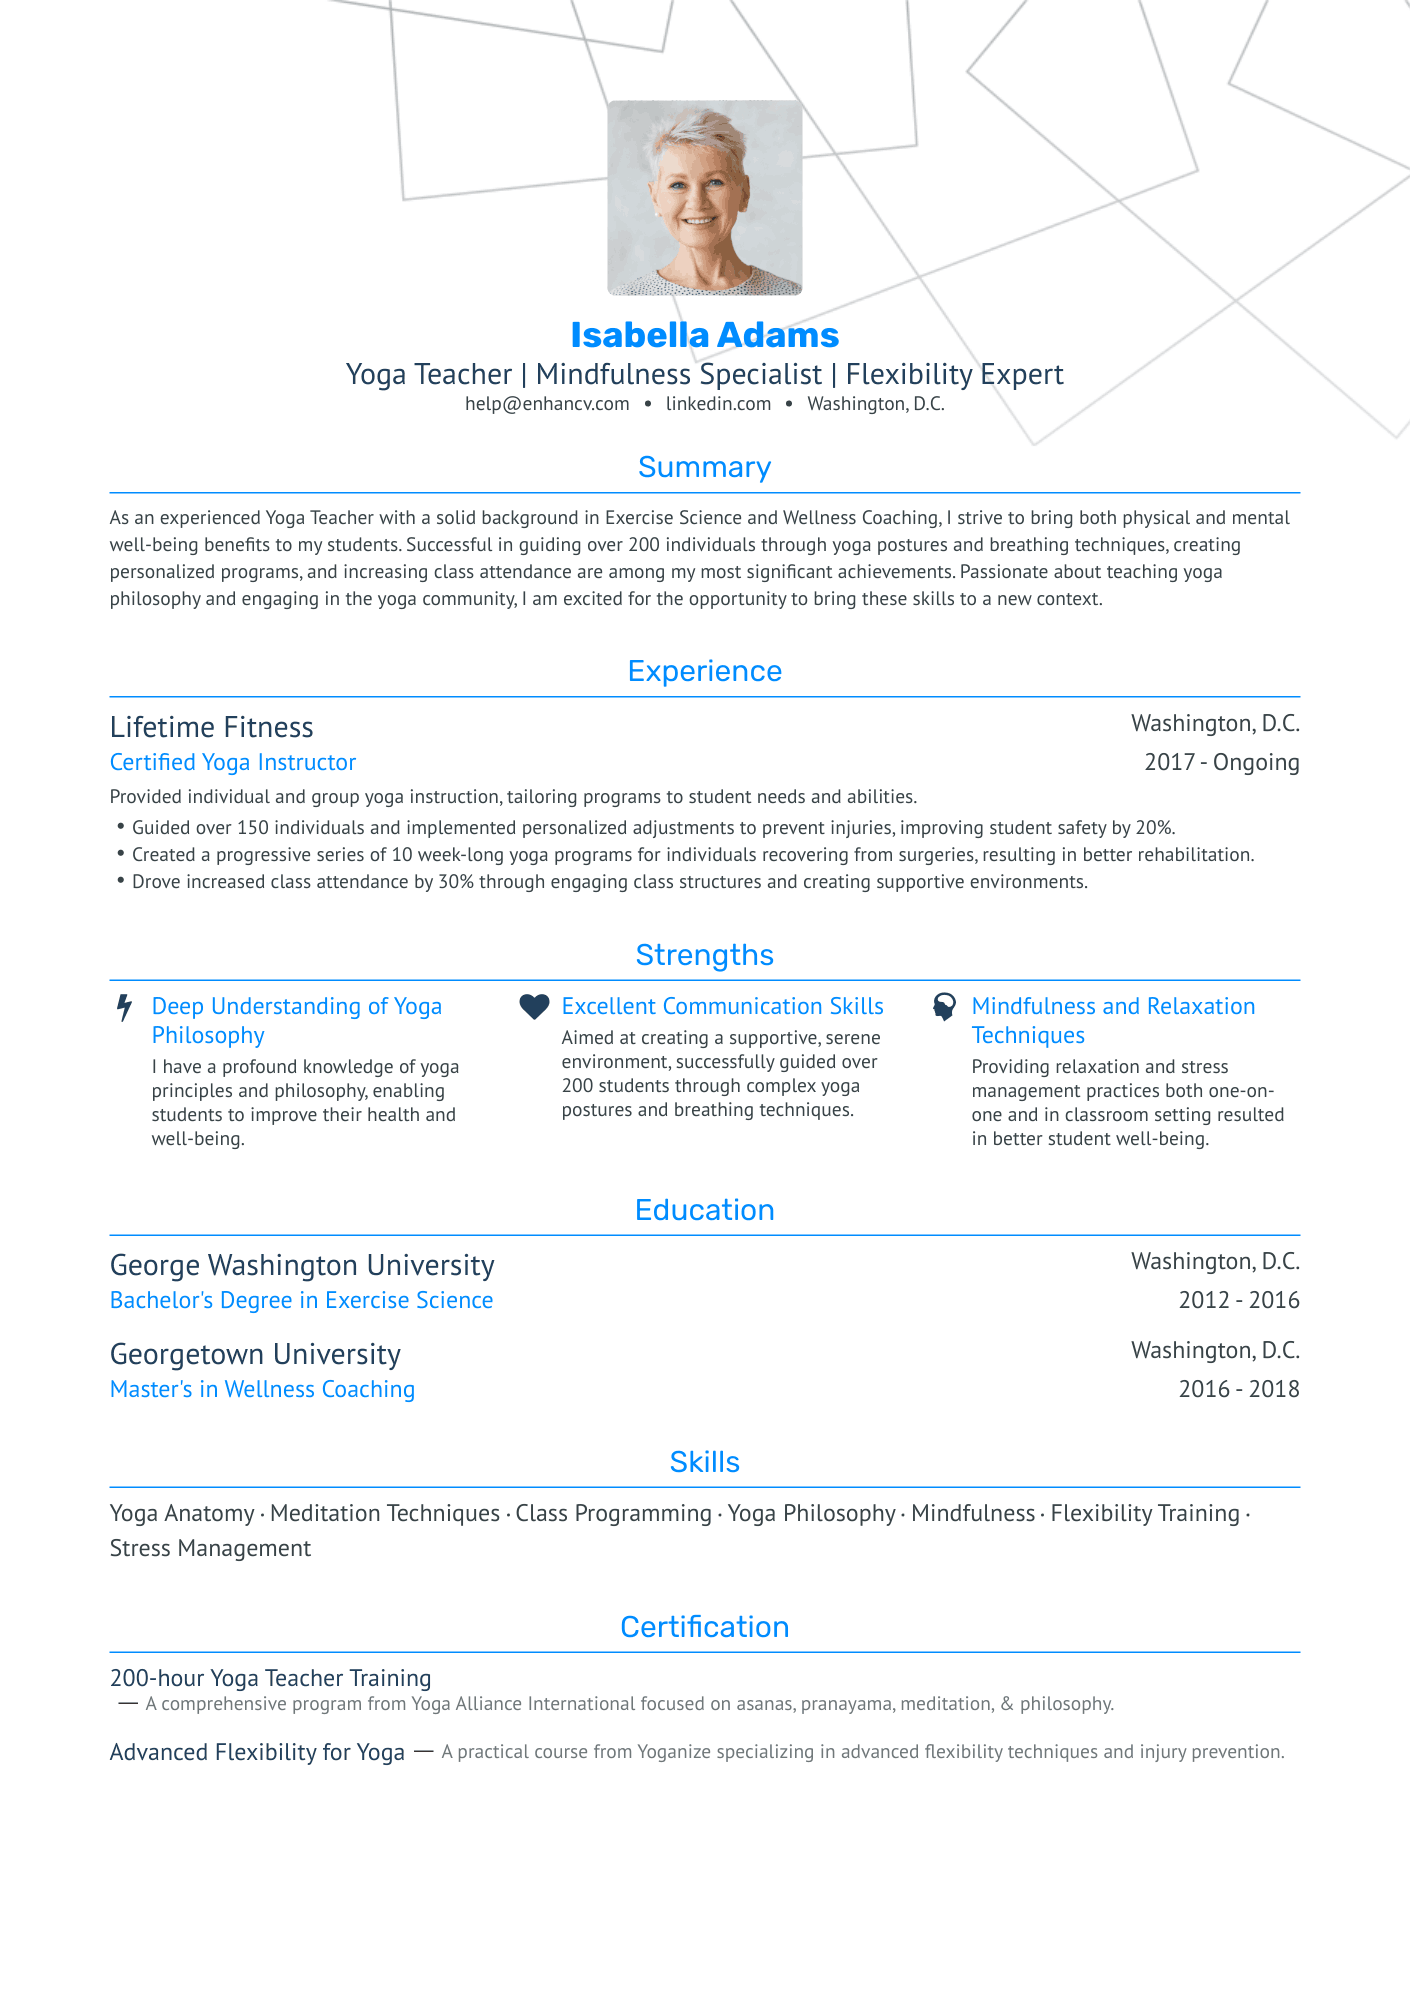 3 Yoga Teacher Resume Examples & How-To Guide for 2023